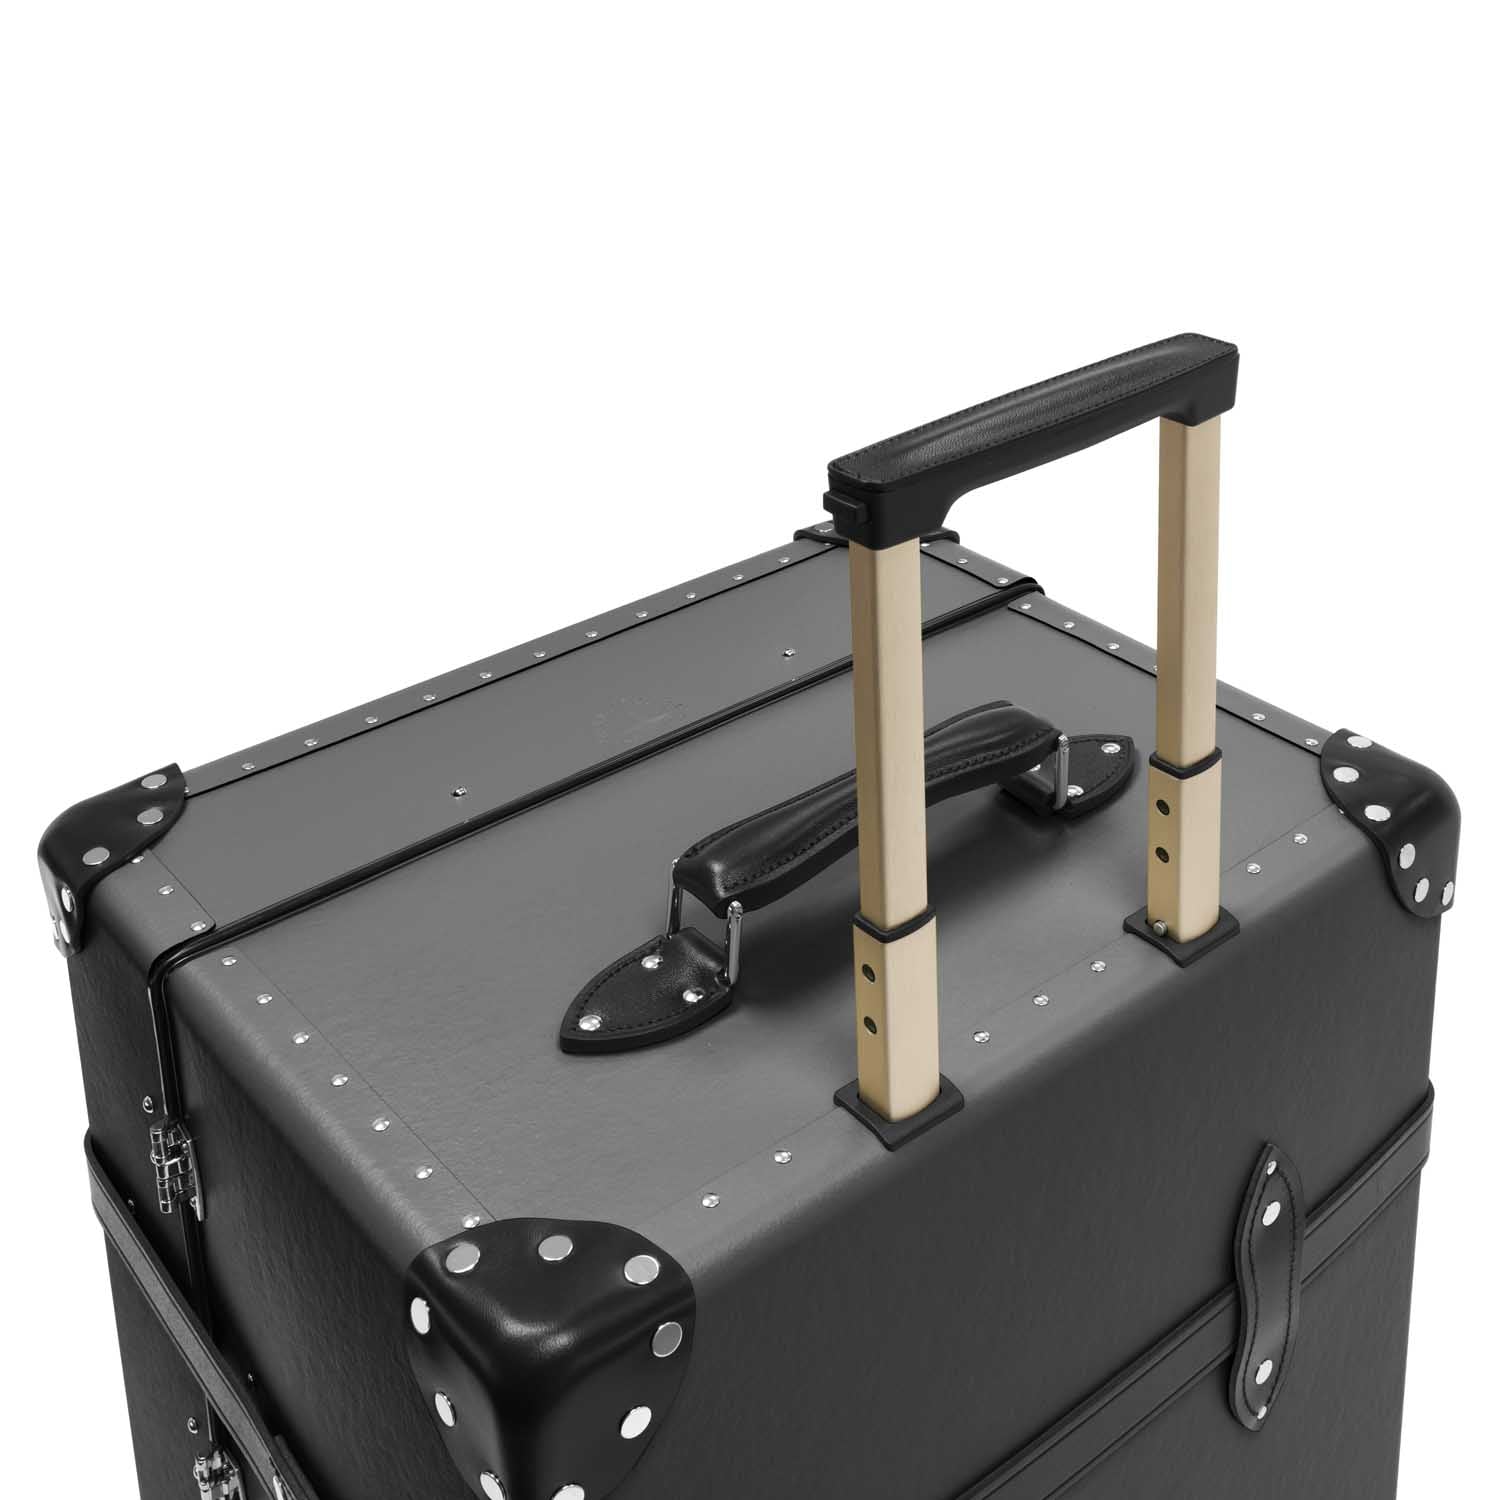 Centenary · XL Trunk - 4 Wheels | Charcoal/Black/Chrome - Globe-Trotter Staging